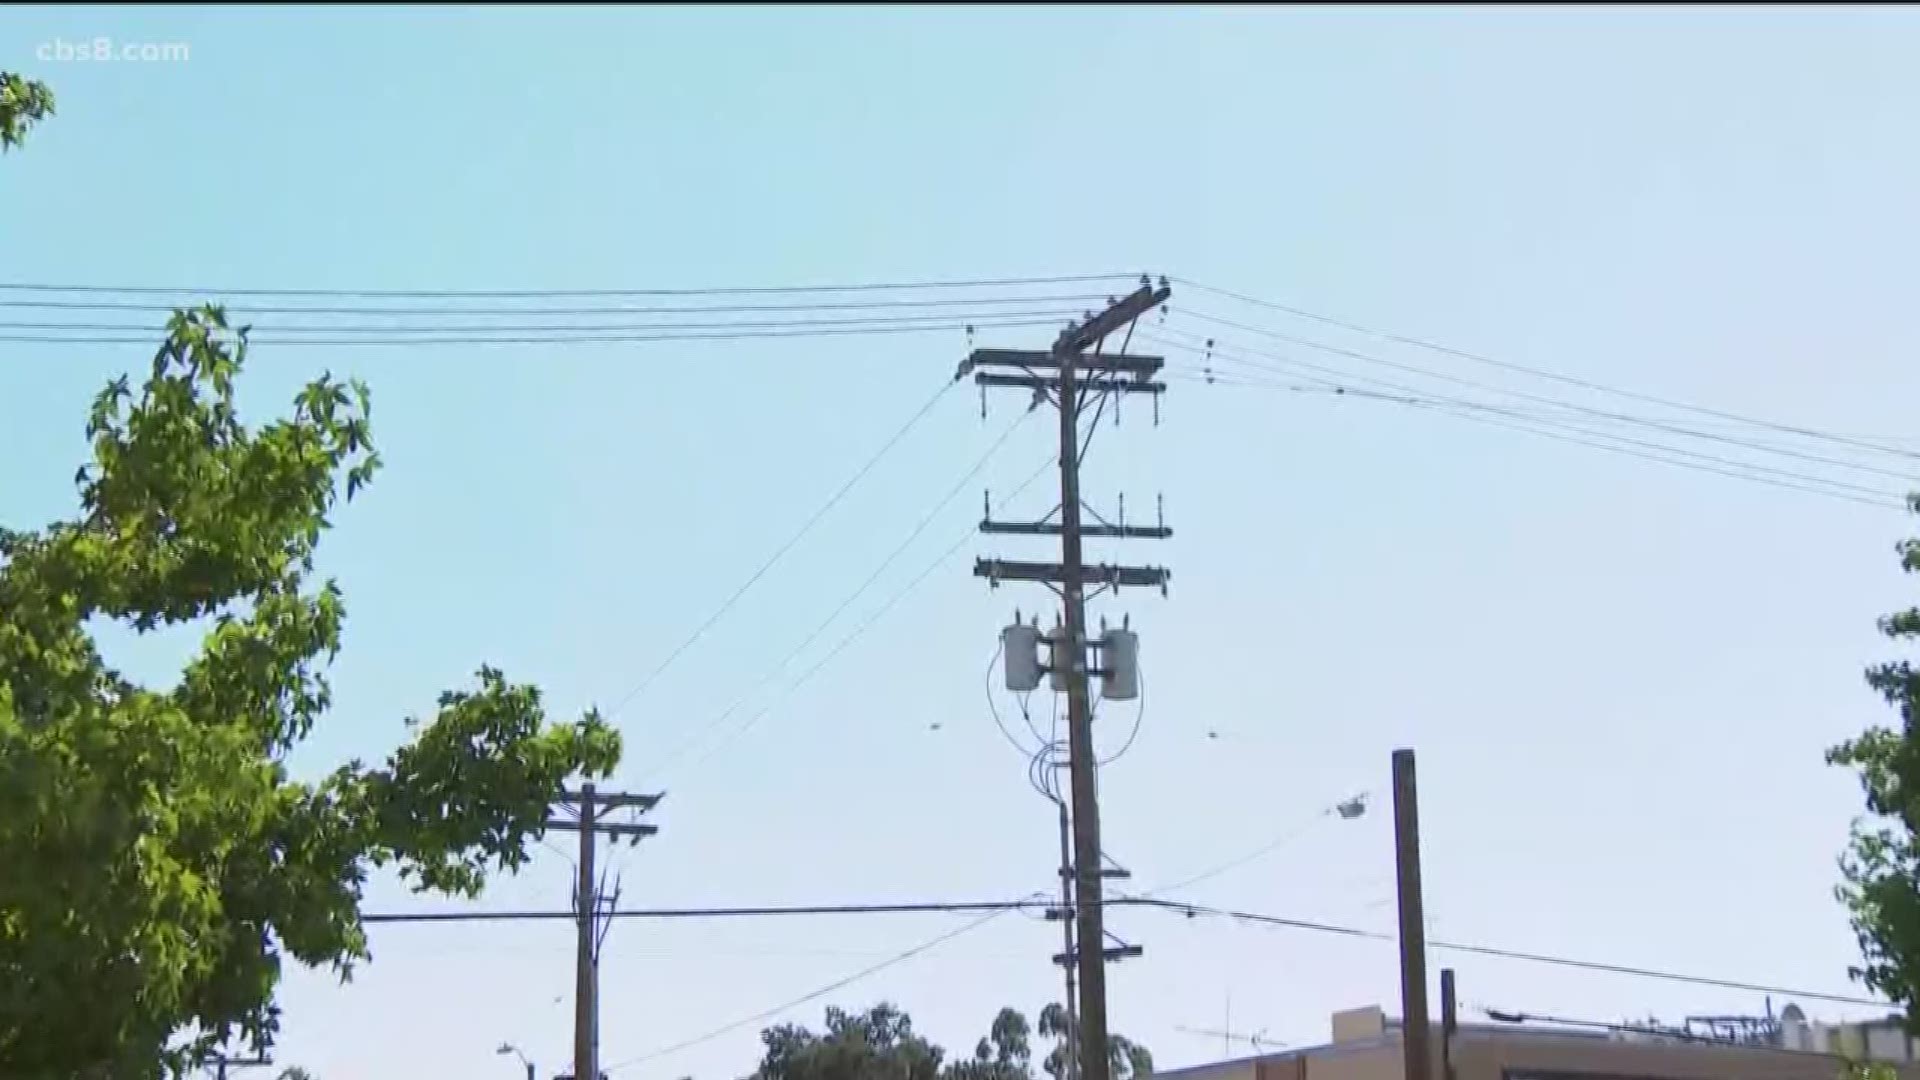 News 8 team coverage Wednesday as San Diego County residents could be impacted by power outages by SDG&E.